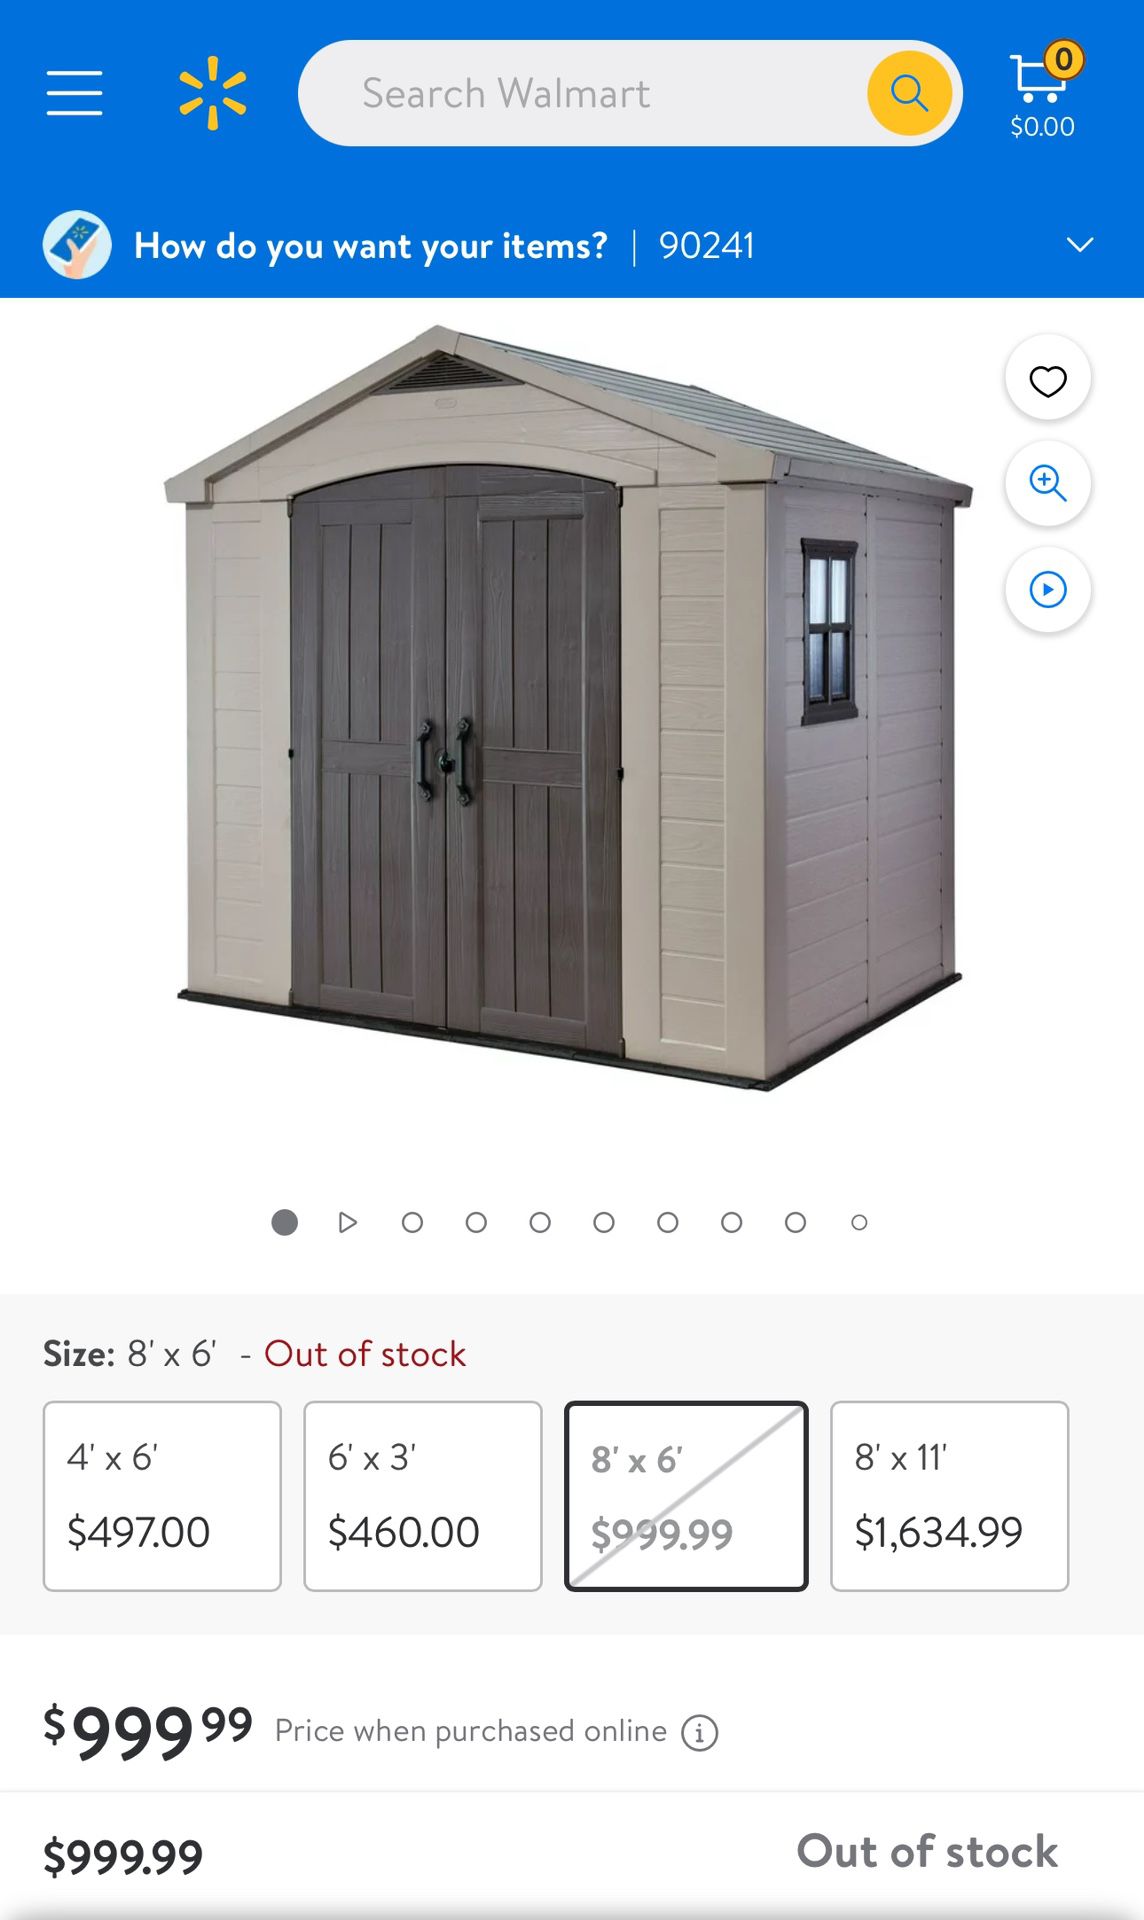 Keter 8x6 Garden shed